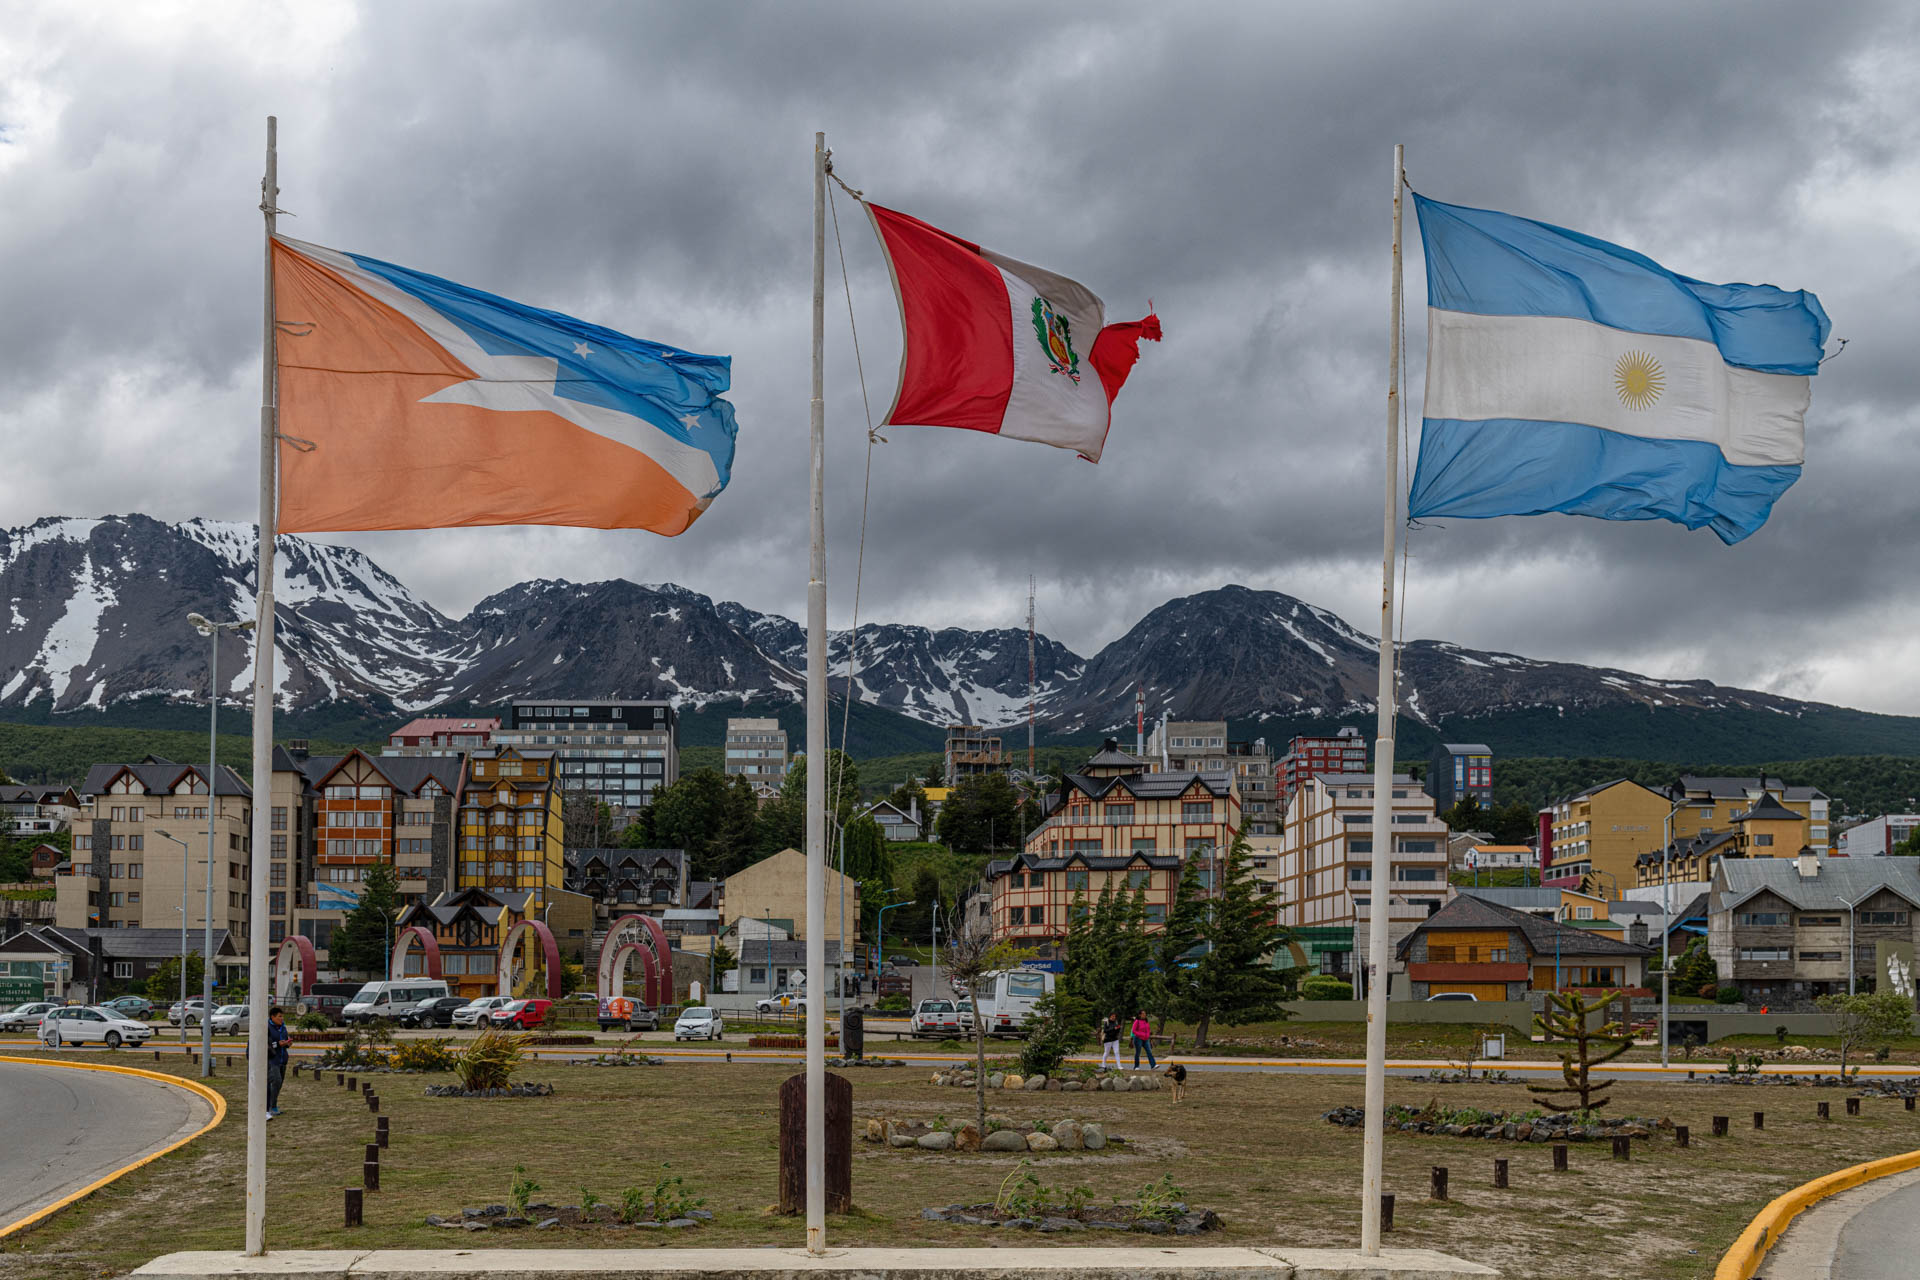 Ushuaia - The most southern city in the world!